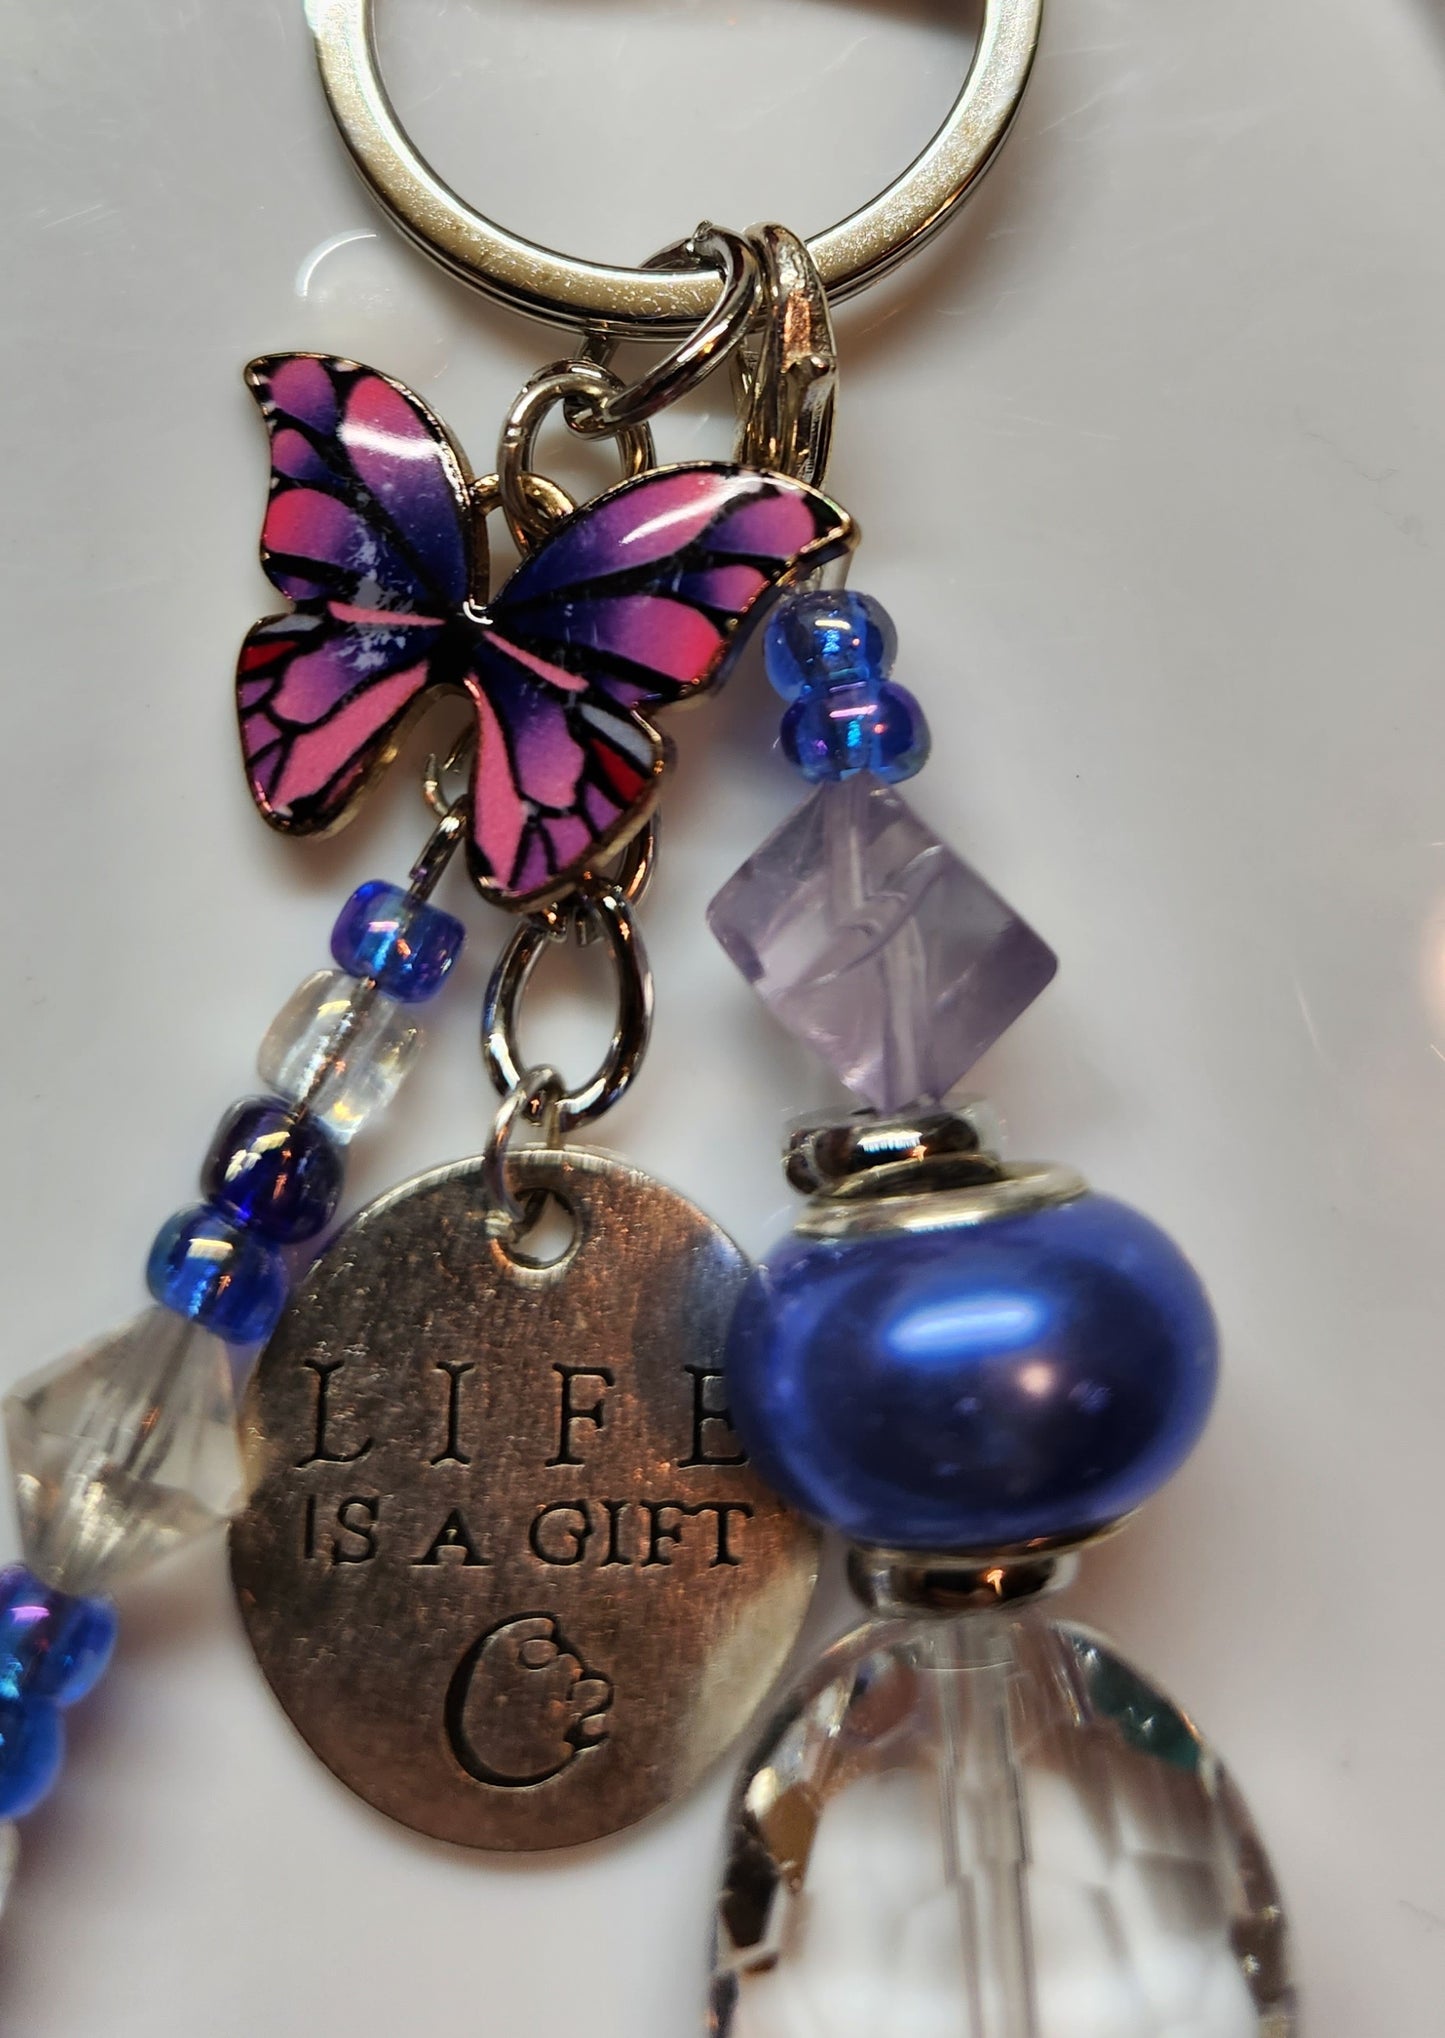 Life is a gift keychain